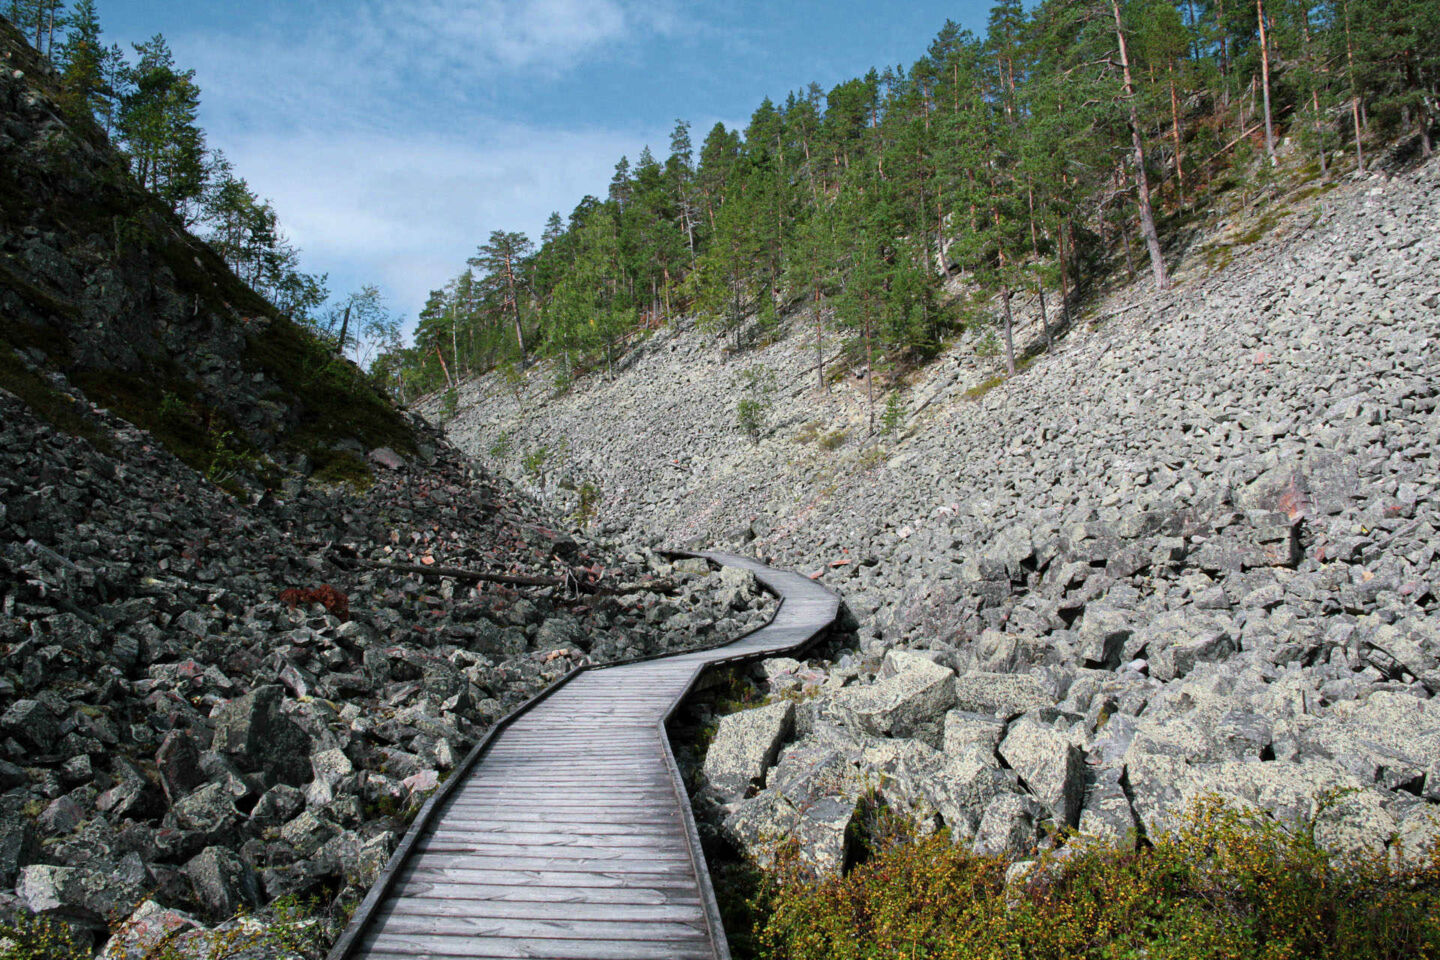 Walkway among the stony gorge in Pyhä in Pelkosenniemi, a filming location in Finnish Lapland